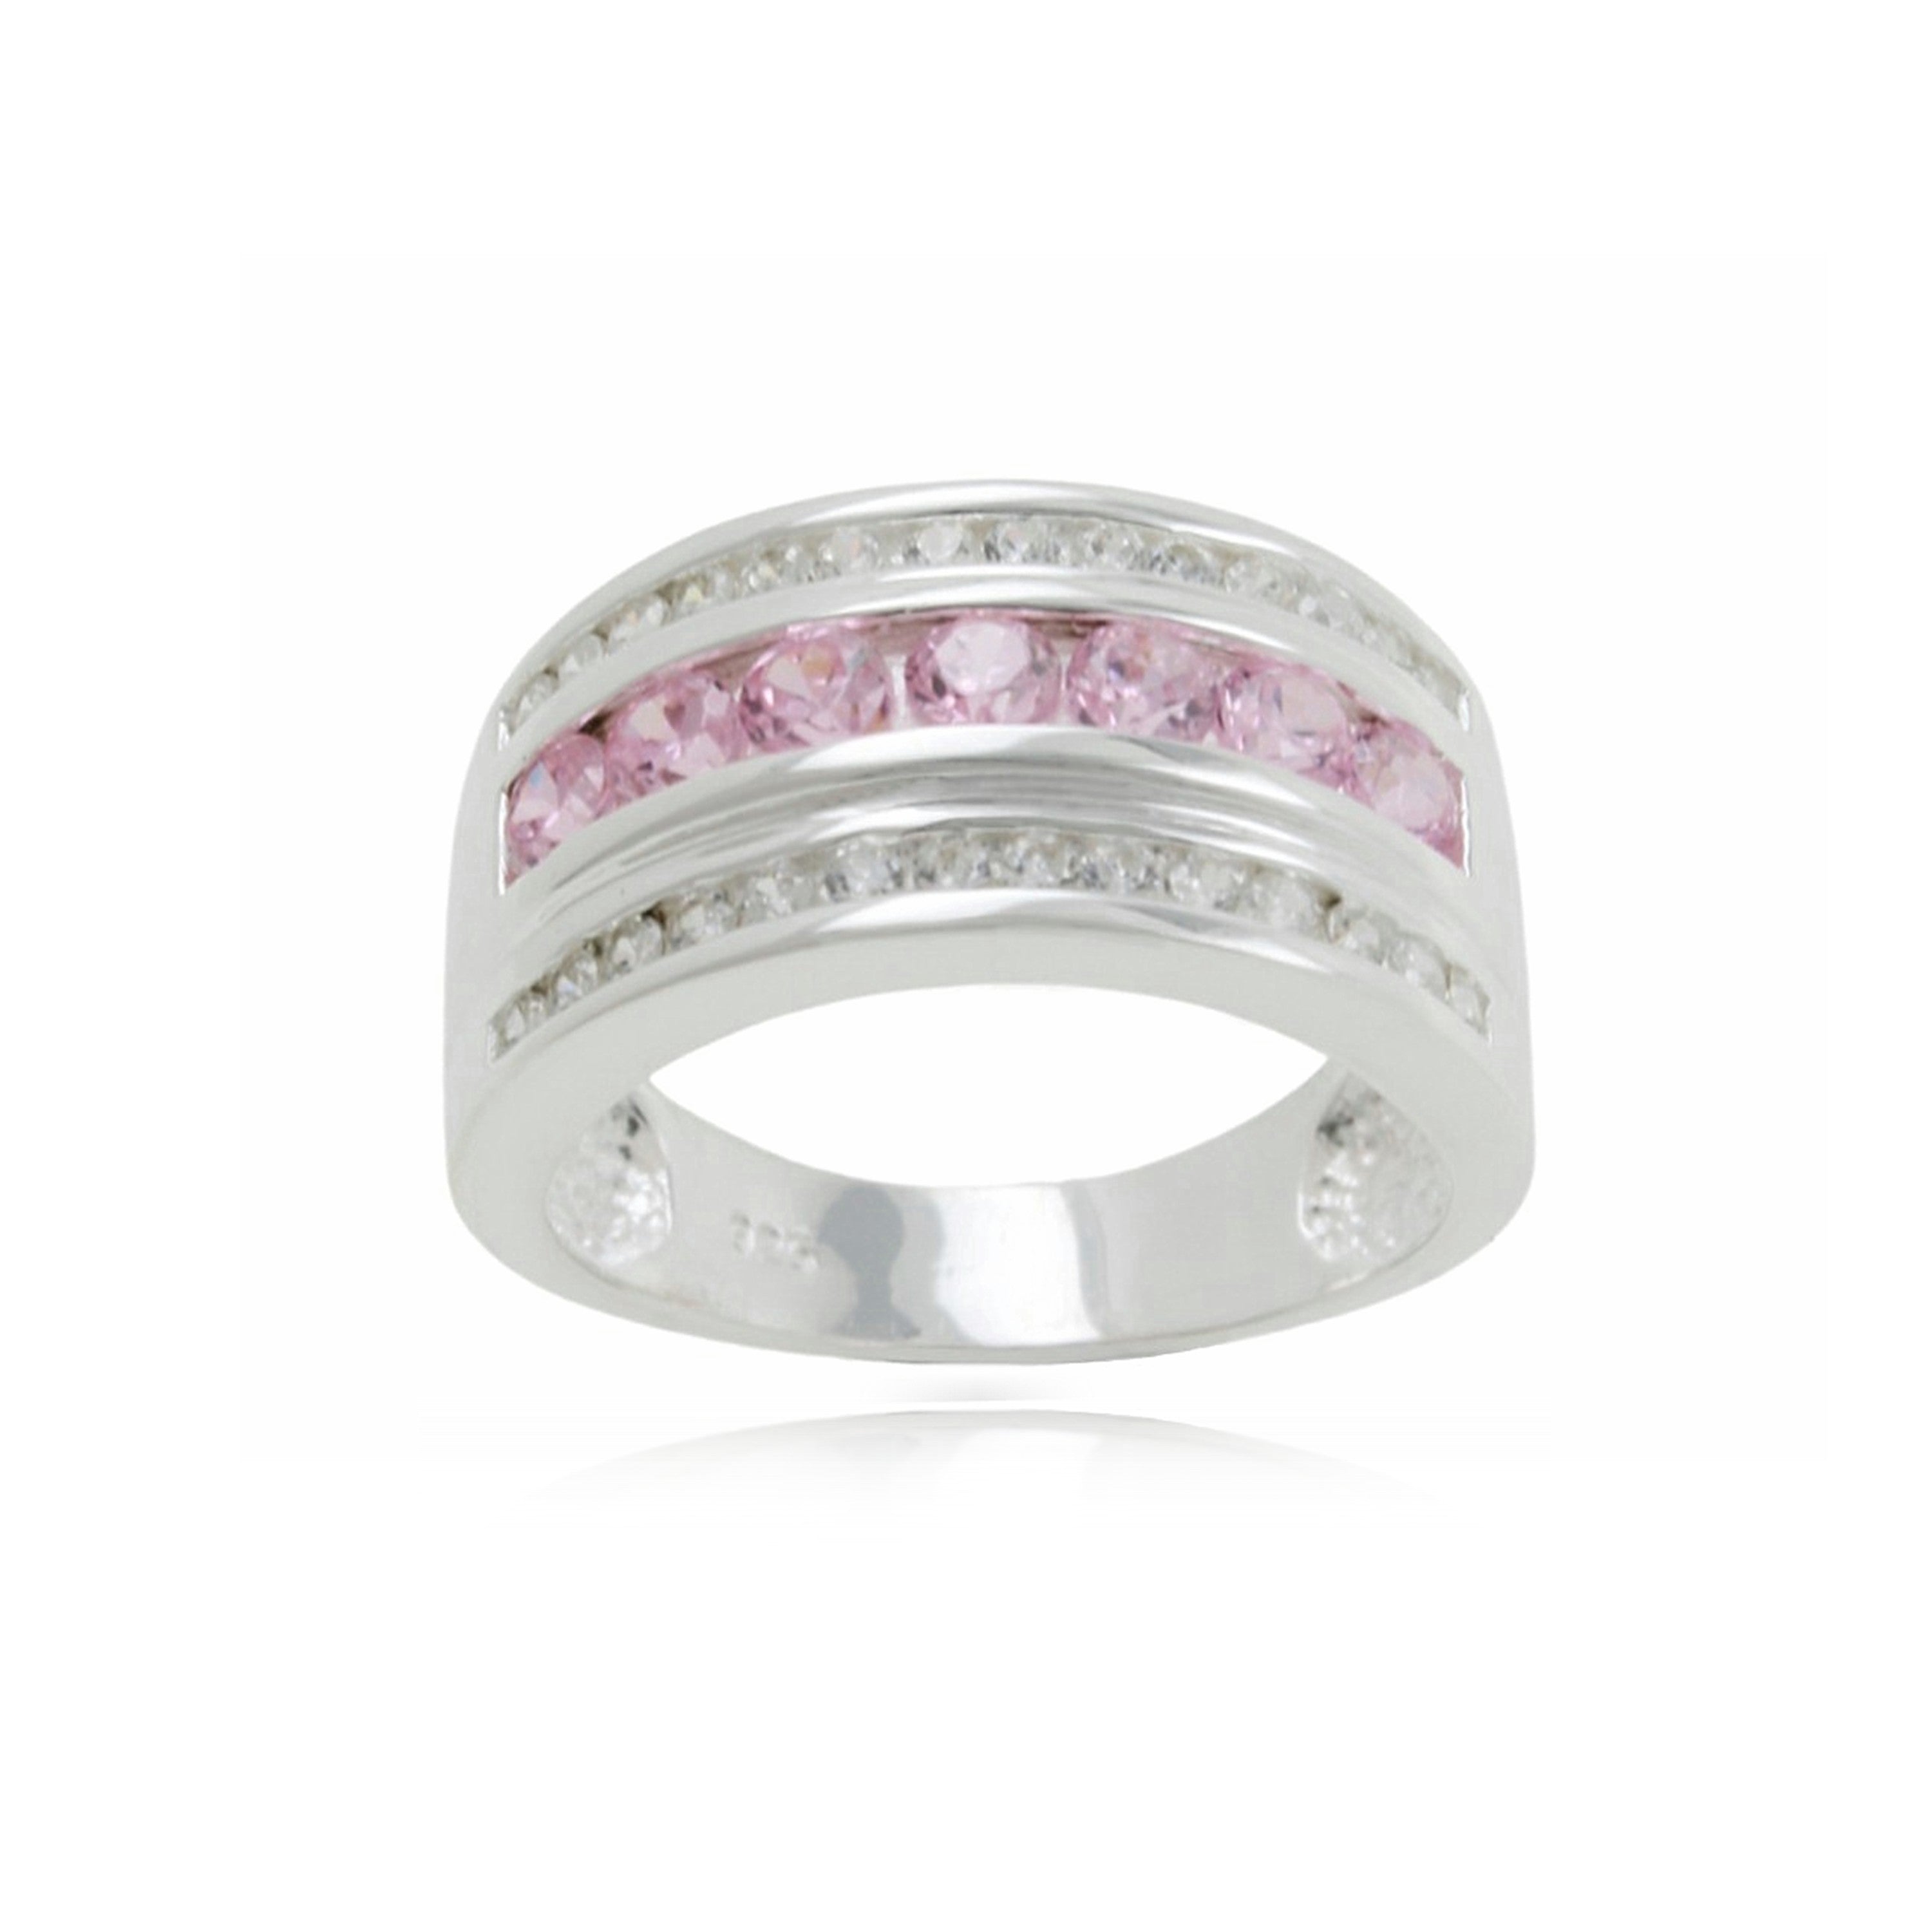 Sterling Silver 3 Row Pink CZ Dress Ring